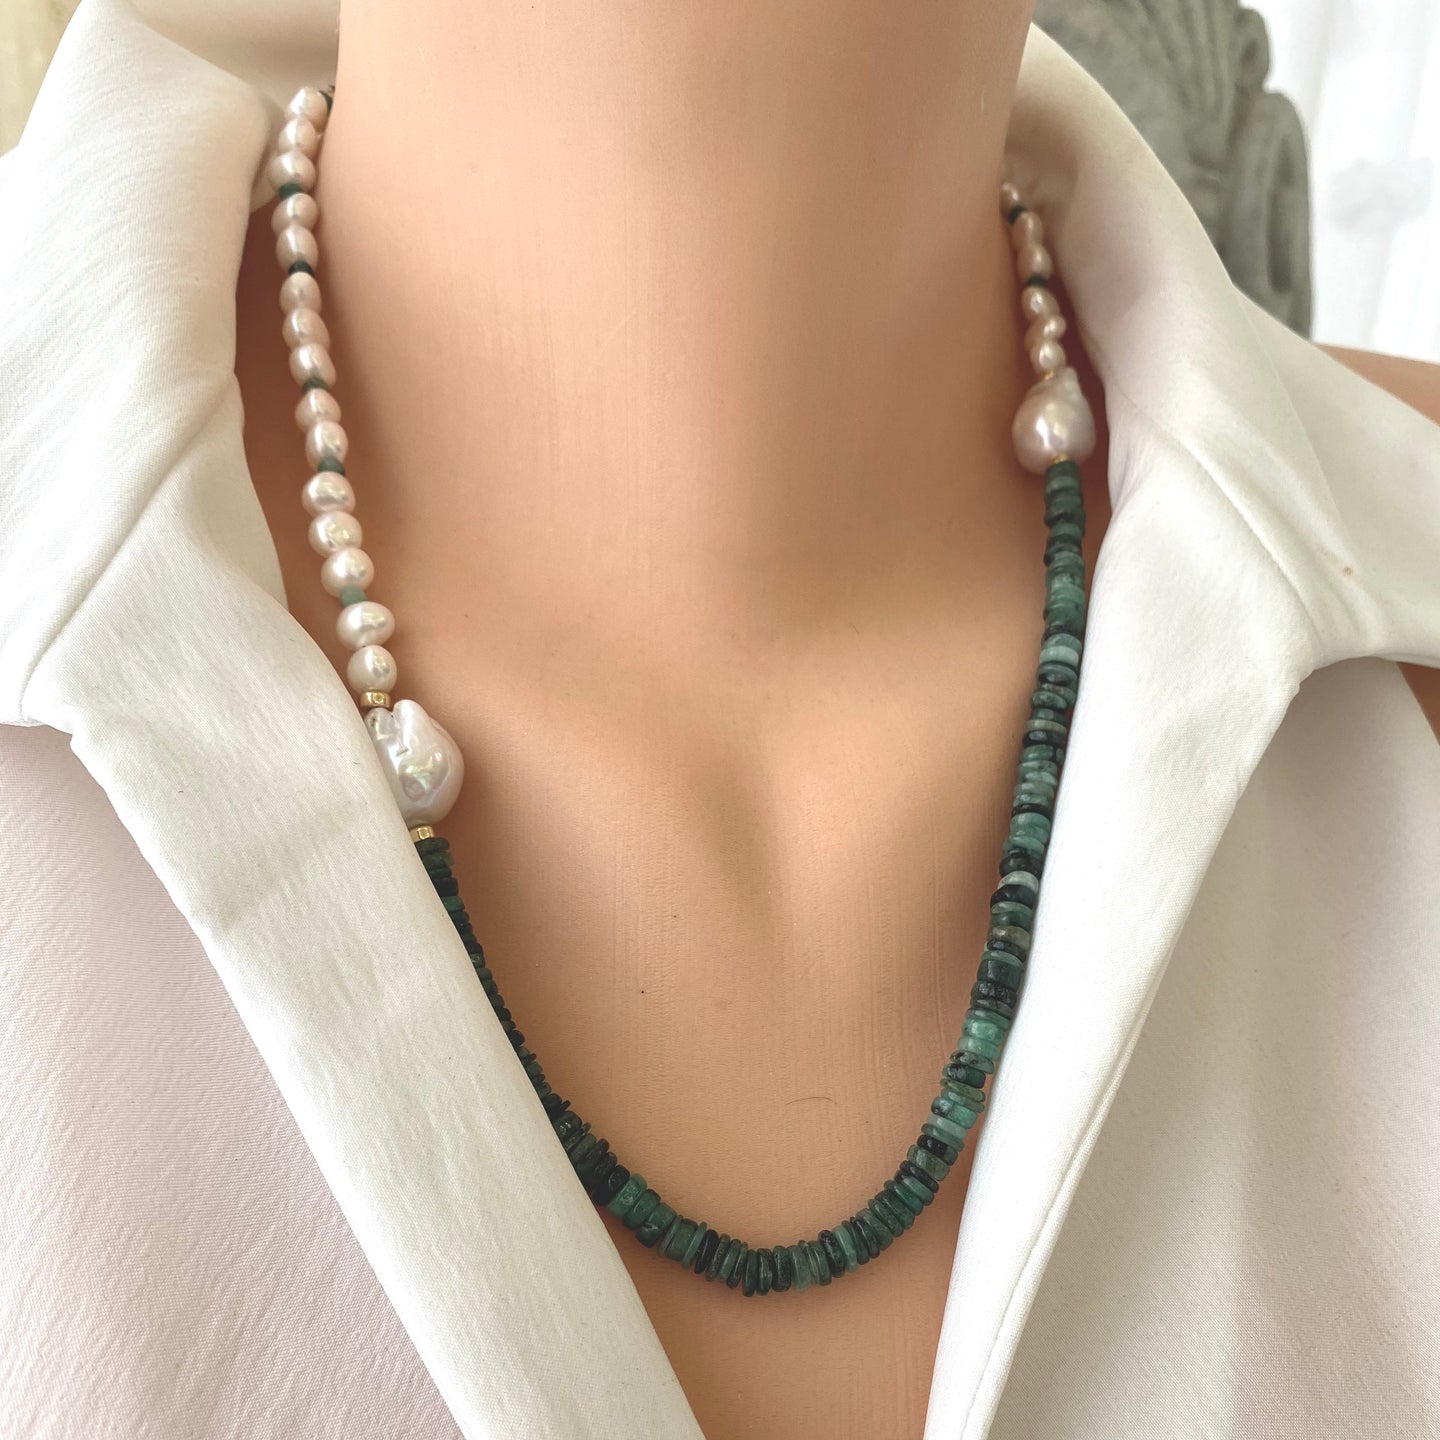 Asymmetric Emerald & Freshwater Baroque Pearl Necklace, Gold Filled, 21